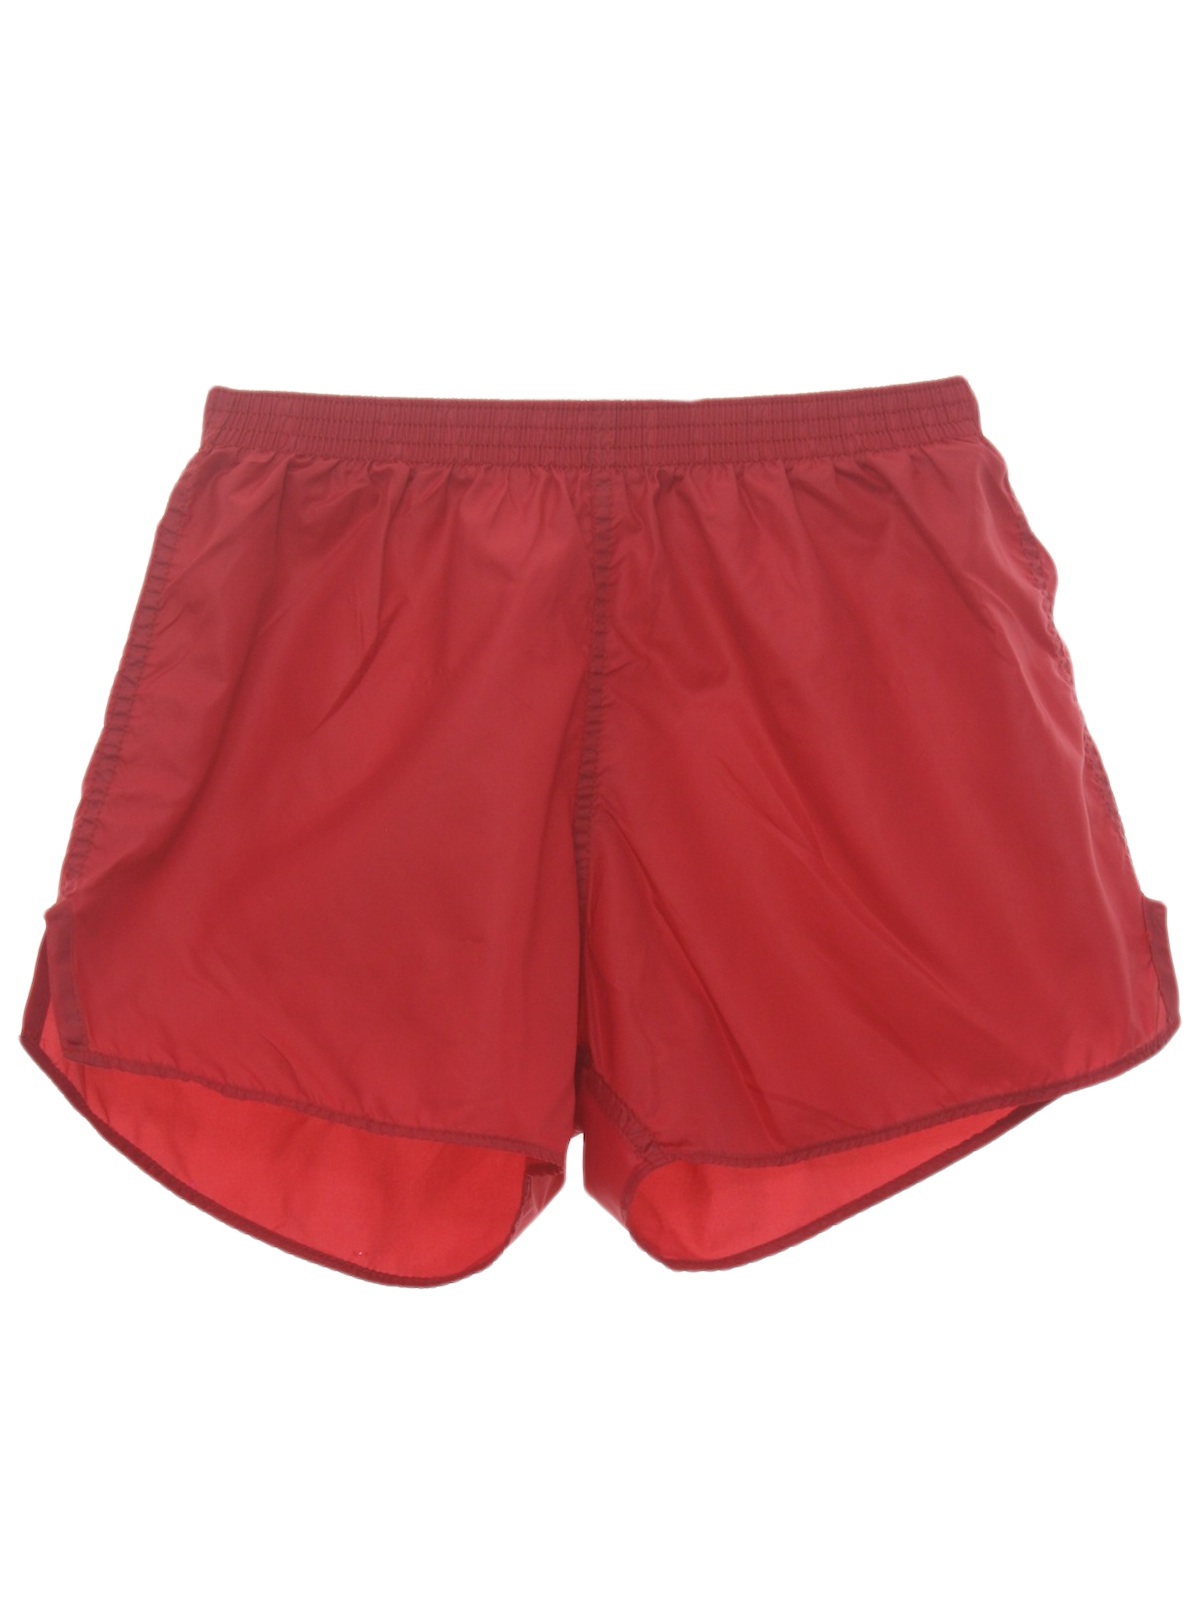 Soffe 80's Vintage Shorts: 80s -Soffe- Mens red background nylon ...